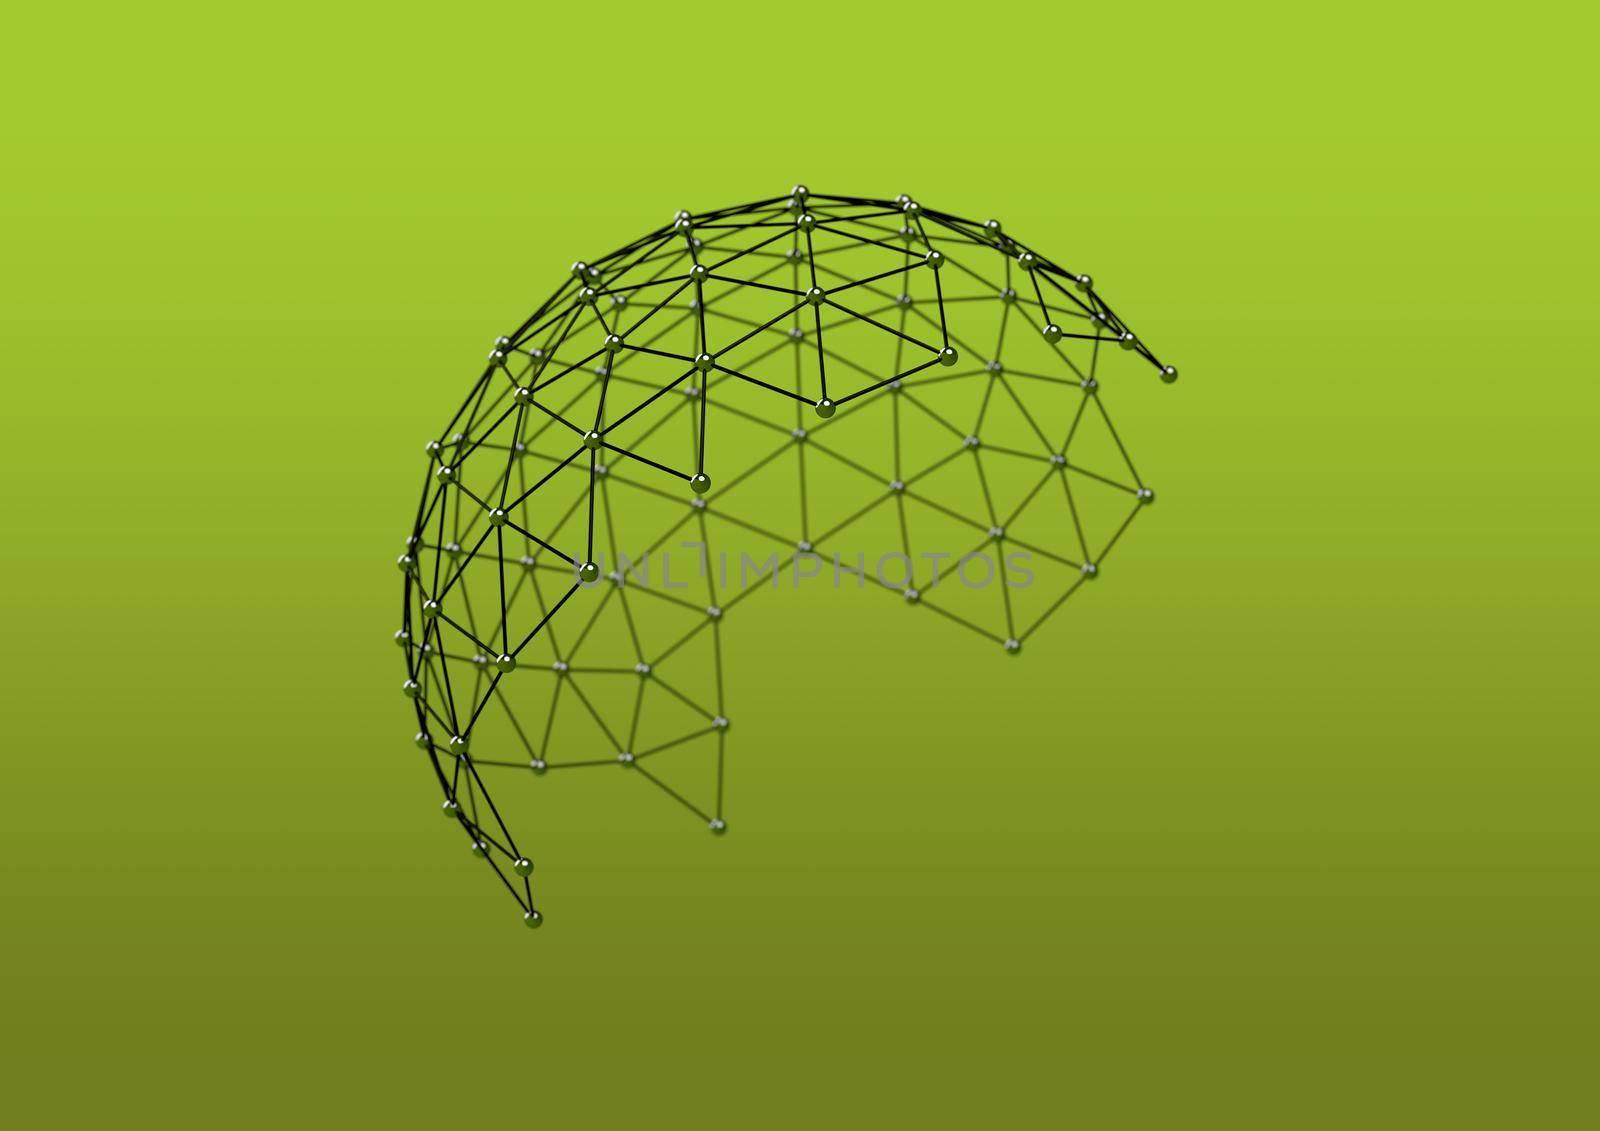 Atomic molecular lattice metal hemisphere on green yellow background. Sphere with connected lines and dots. Wireframe network, 3D illustration rendering